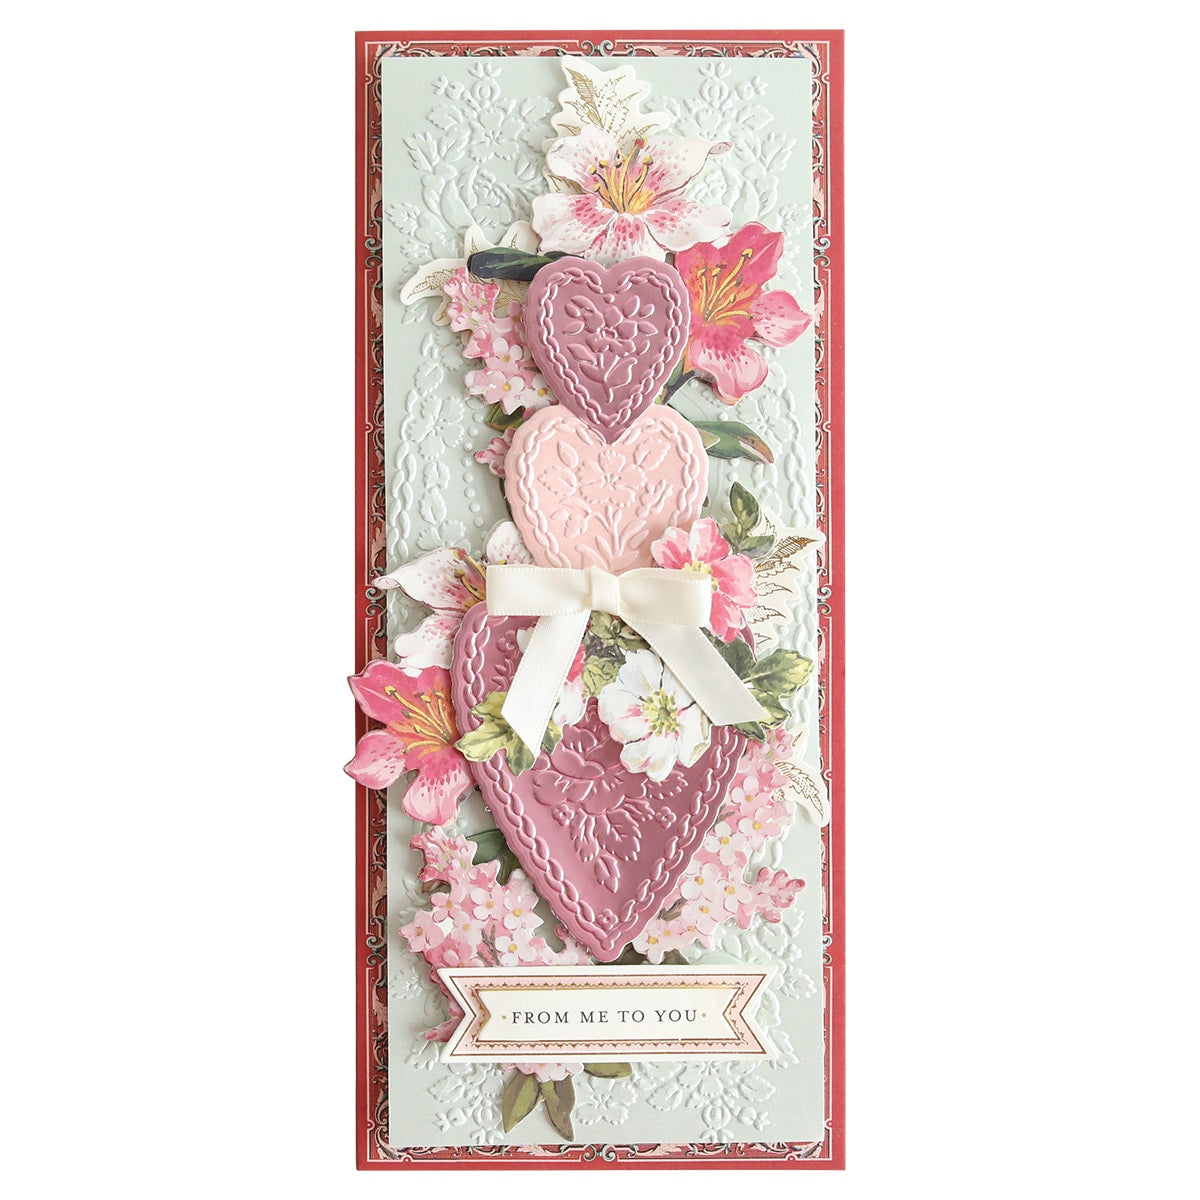 a card with two hearts and flowers on it.